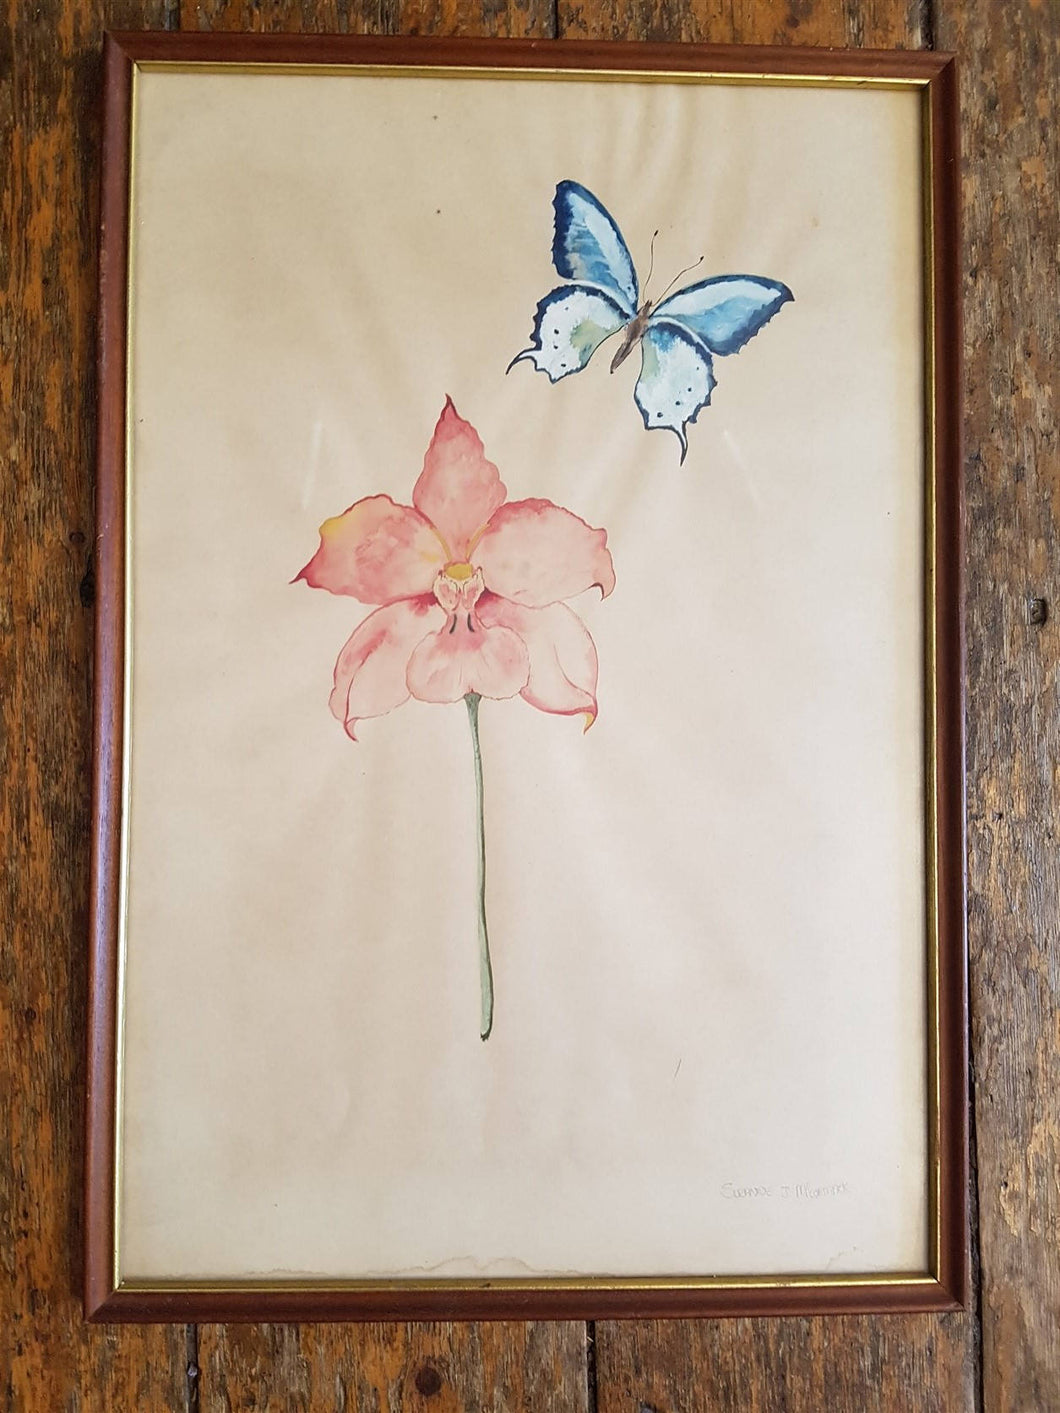 Vintage Pink Flower and Blue Butterfly Original Watercolor Art Painting 1920's - 1930's Framed